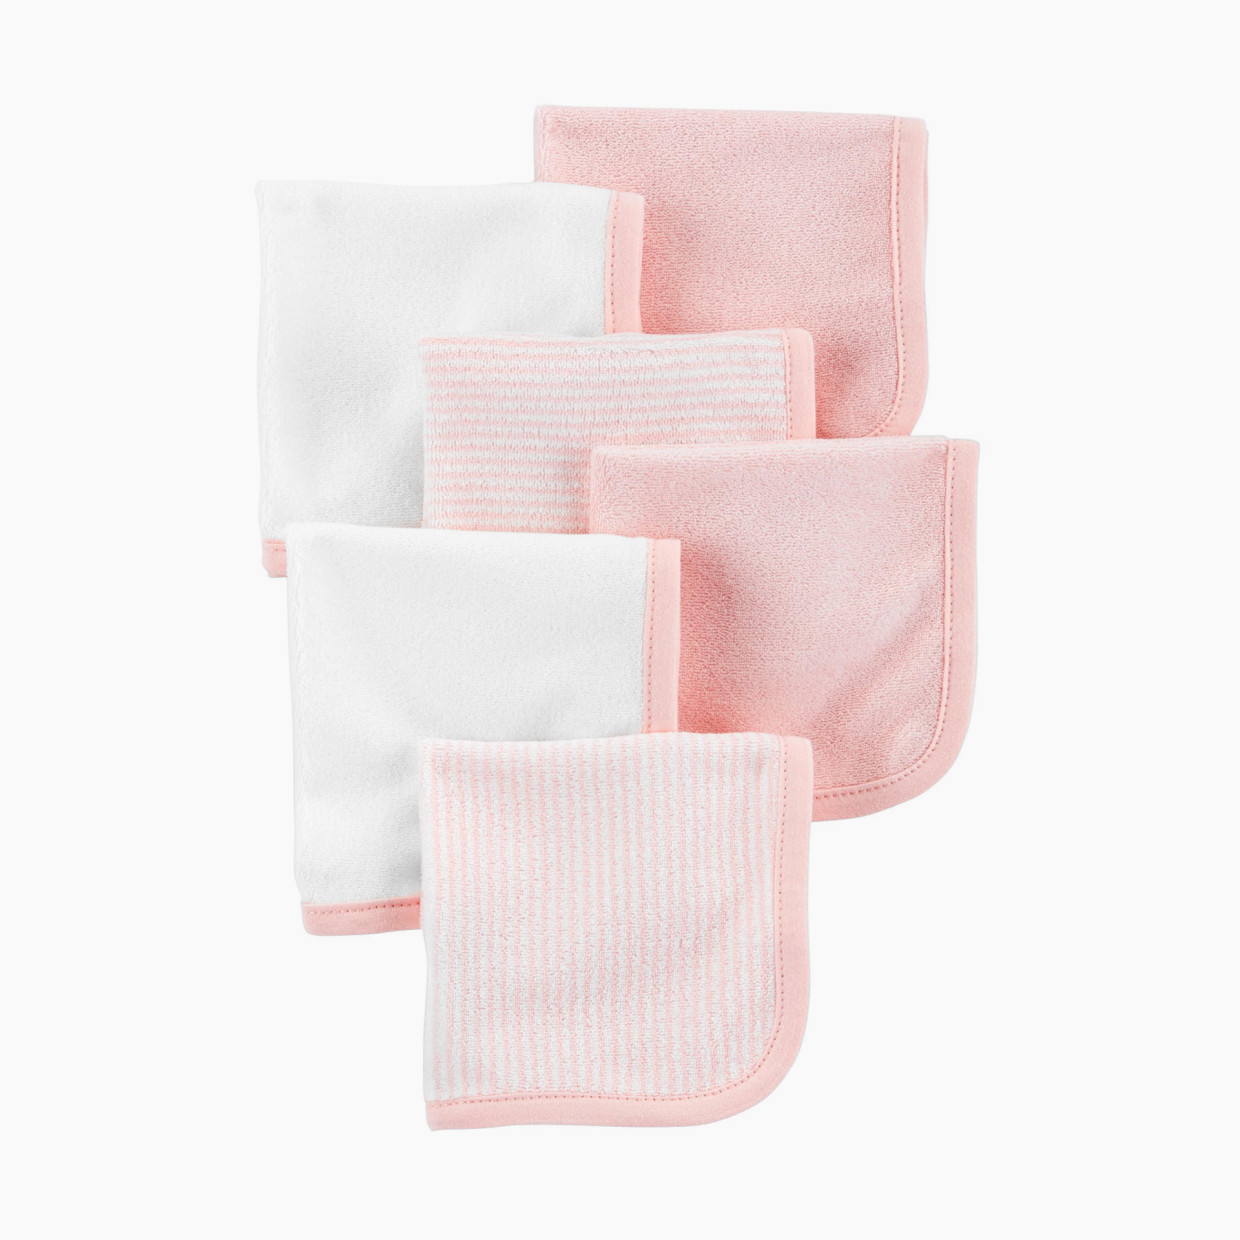 Carter's Wash Cloth (6 Pack) - Pink.